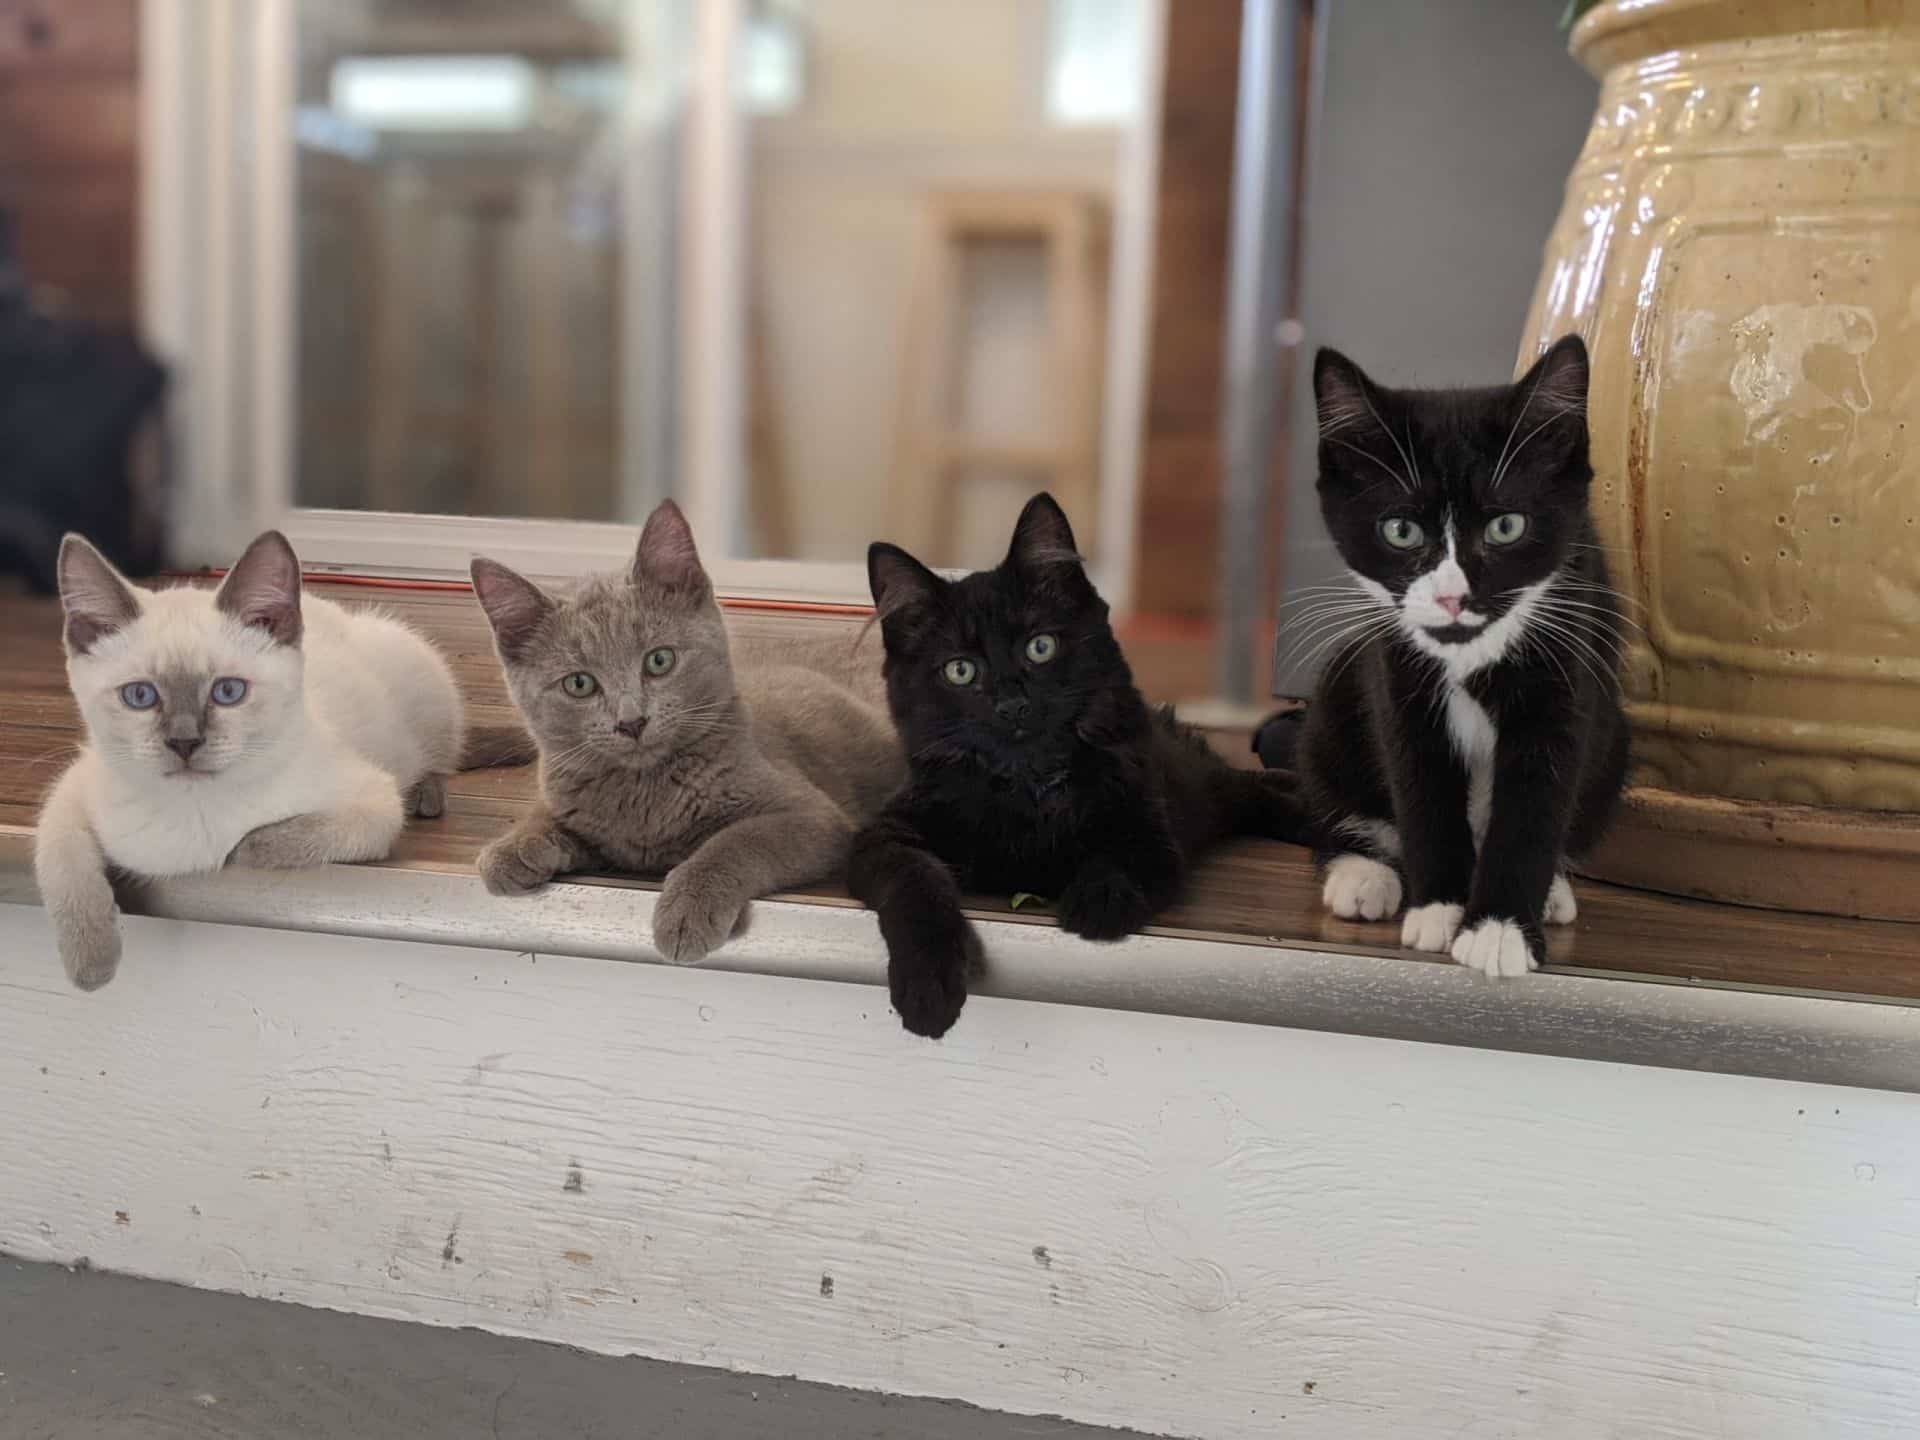 war room most pet friendly office in canada foster kittens sitting on stairs